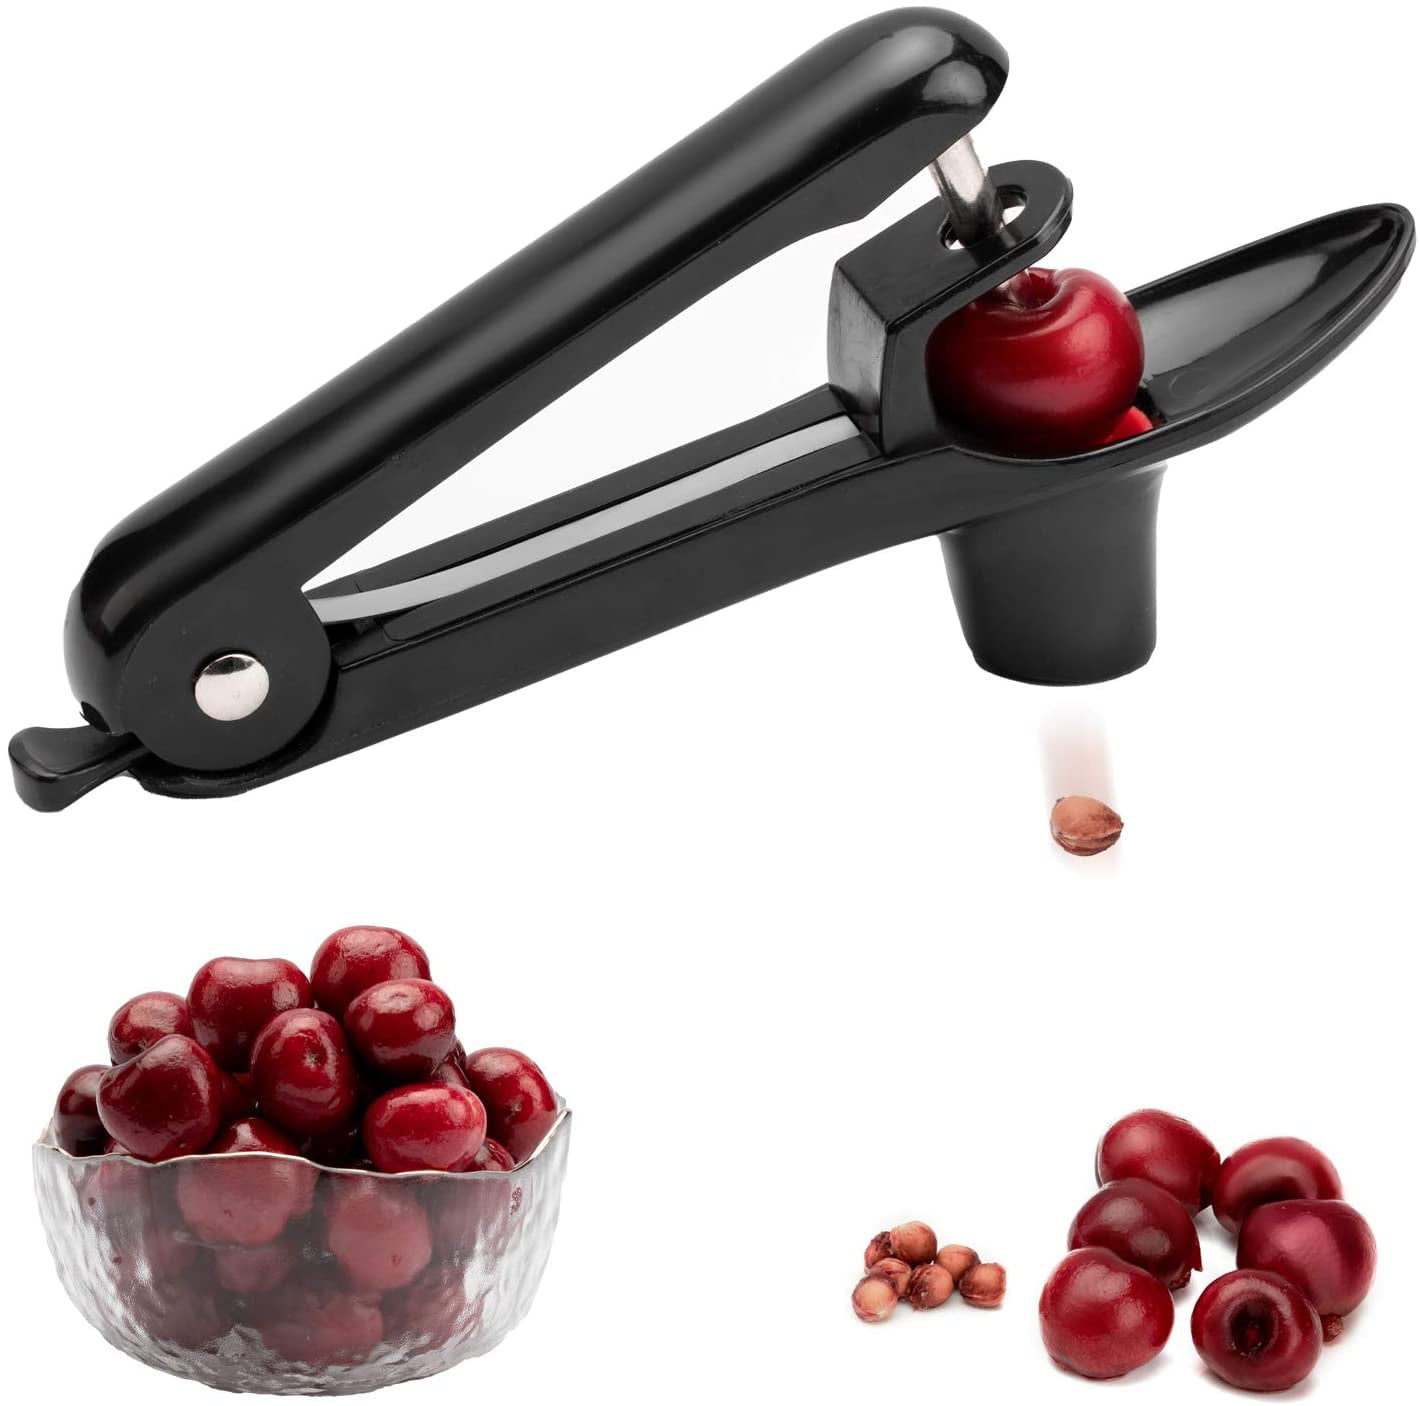 Cherry Pitter Tool Portable Cherry Stoner Pitter Core Remover Kitchen Aid Heavy Duty Olive Pitter Tool with Space-Saving Lock Design Seed Remover Tool with Food-Grade Silicone Cup Black-1pack 